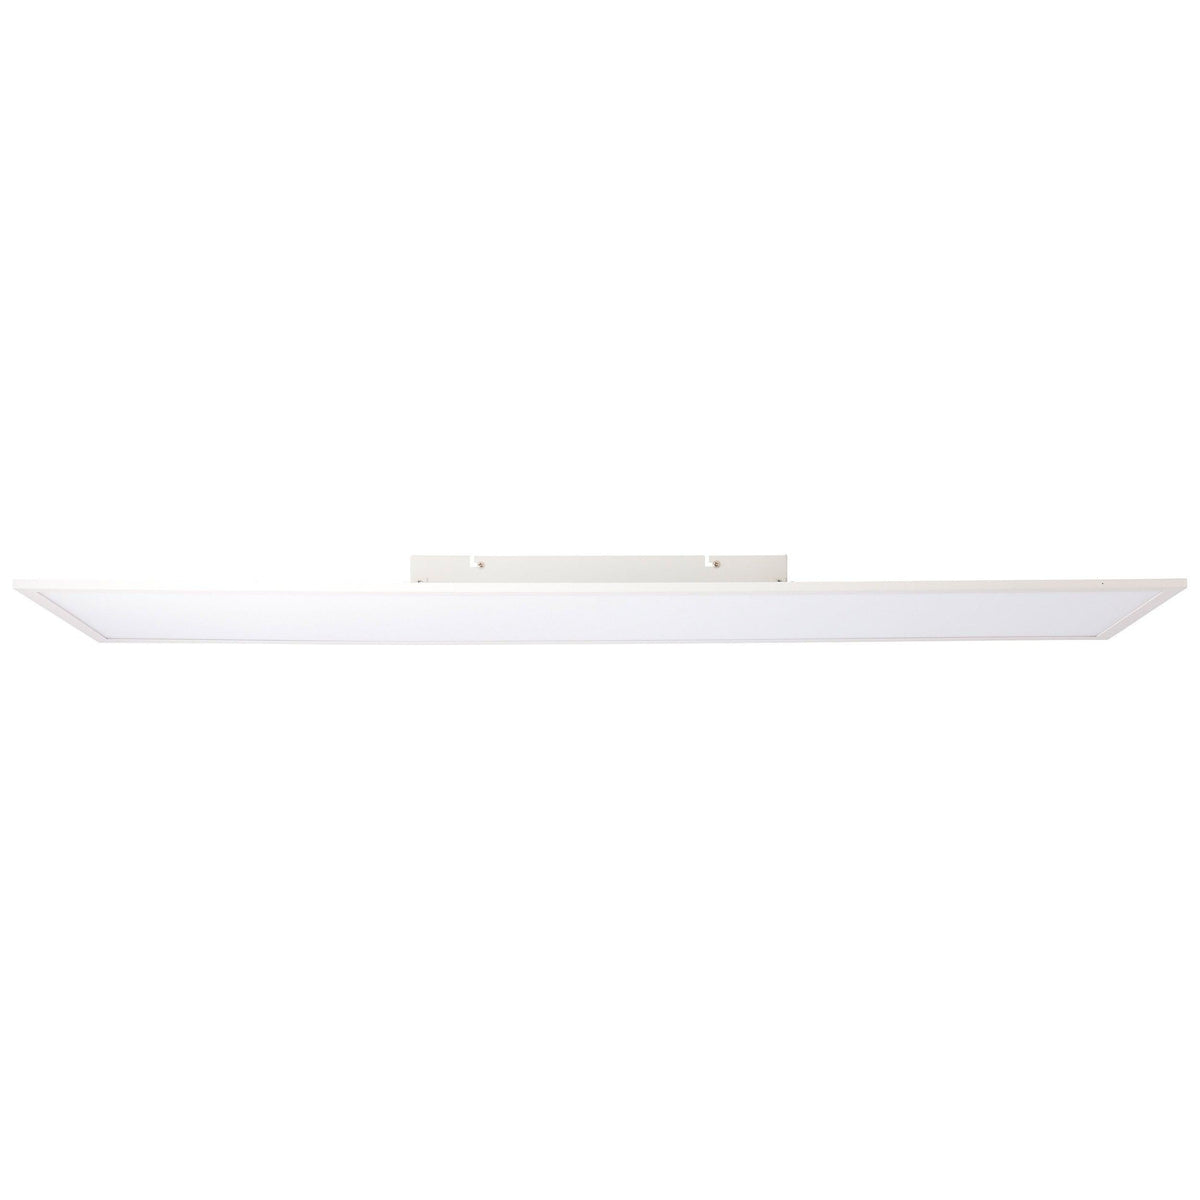 Brilliant 1 Light 40W Buffi LED Ceiling Panel - White | G90359A05 from DID Electrical - guaranteed Irish, guaranteed quality service. (6977603698876)